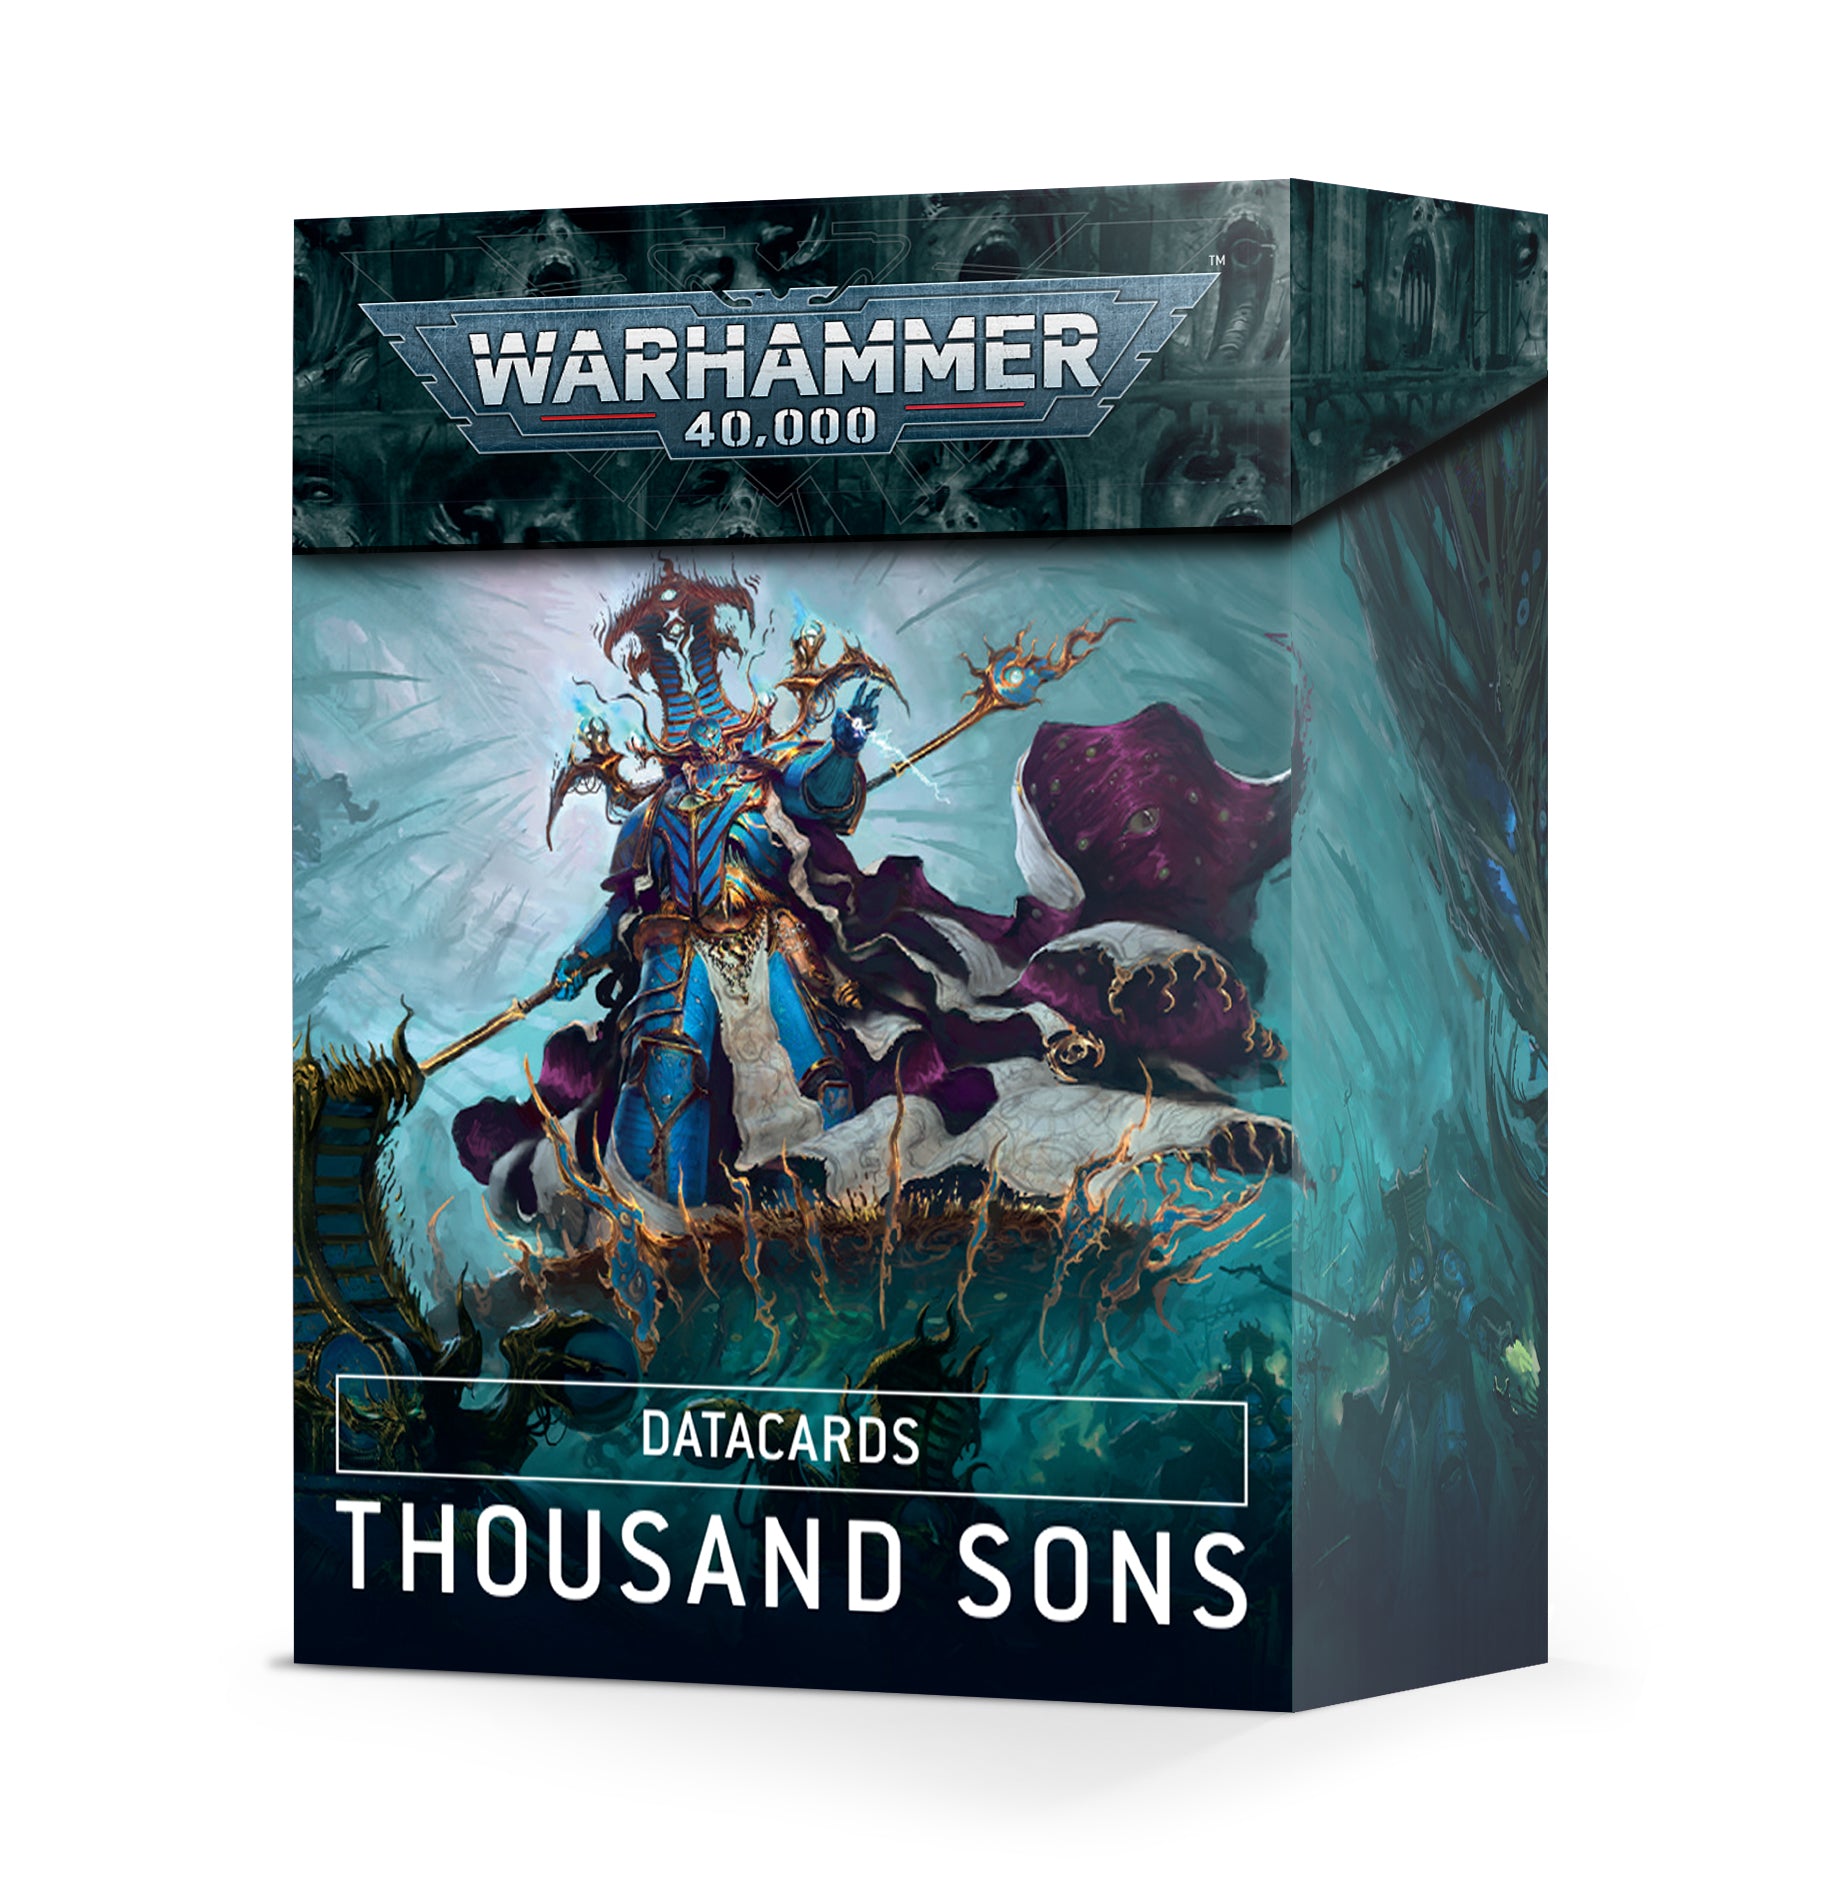 Datacards: Thousand Sons (9th Edition) box cover